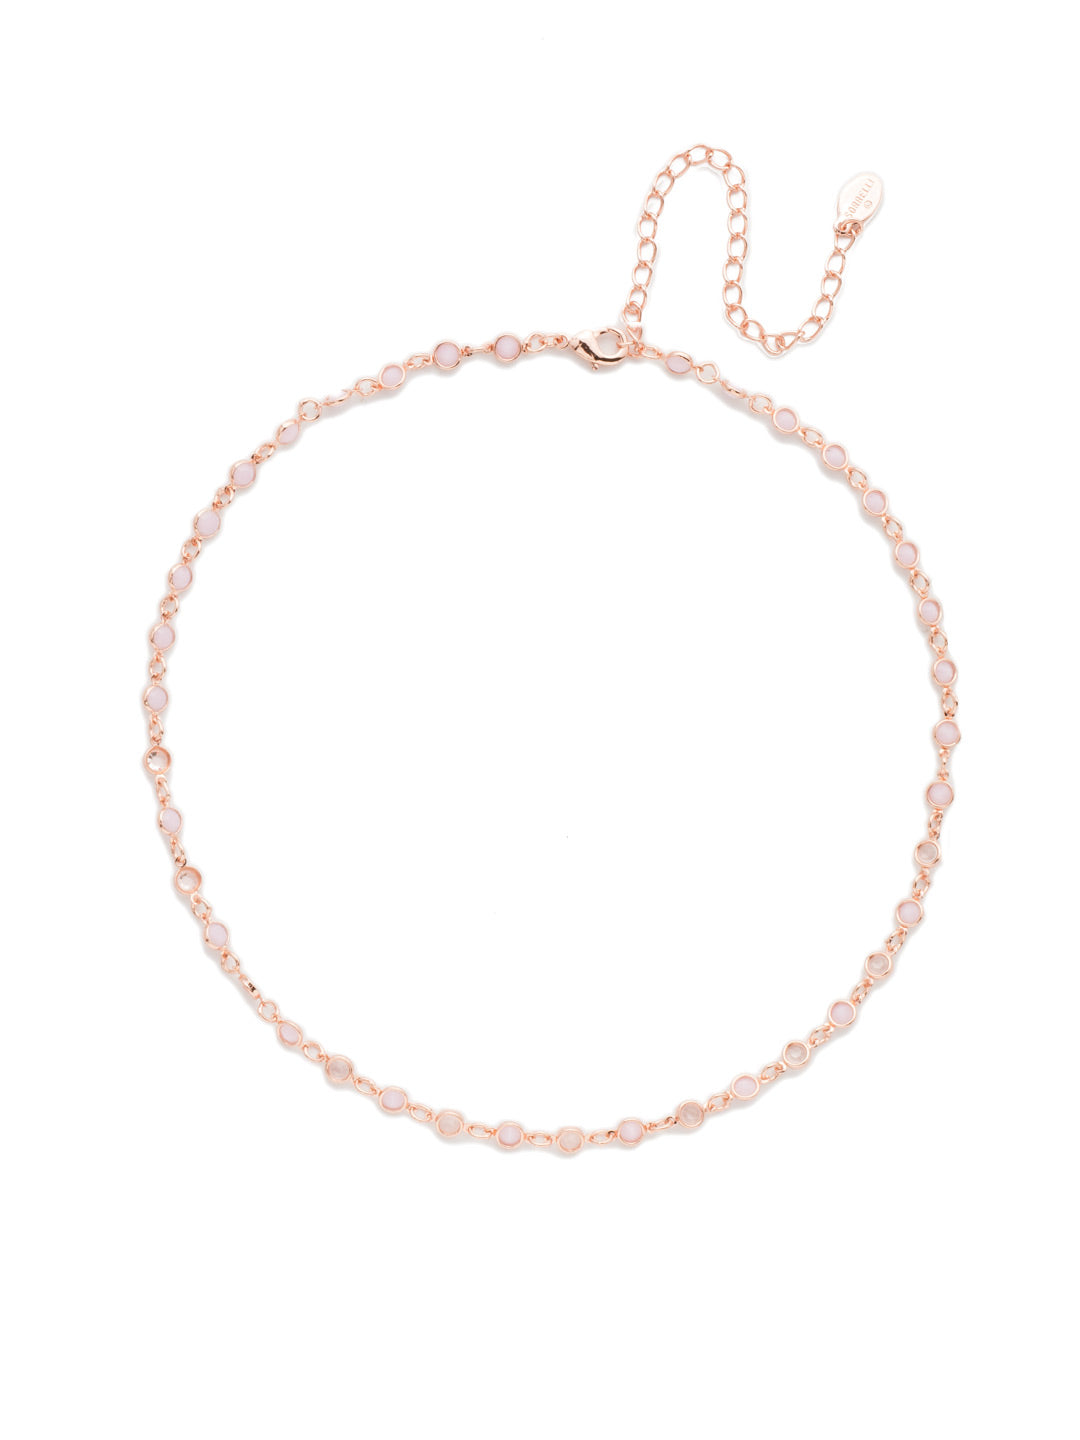 Jasmine Tennis Necklace - NEP92RGPNK - <p>This fully encrusted crystal necklace wit clear gems From Sorrelli's Petal Pink collection in our Rose Gold-tone finish.</p>